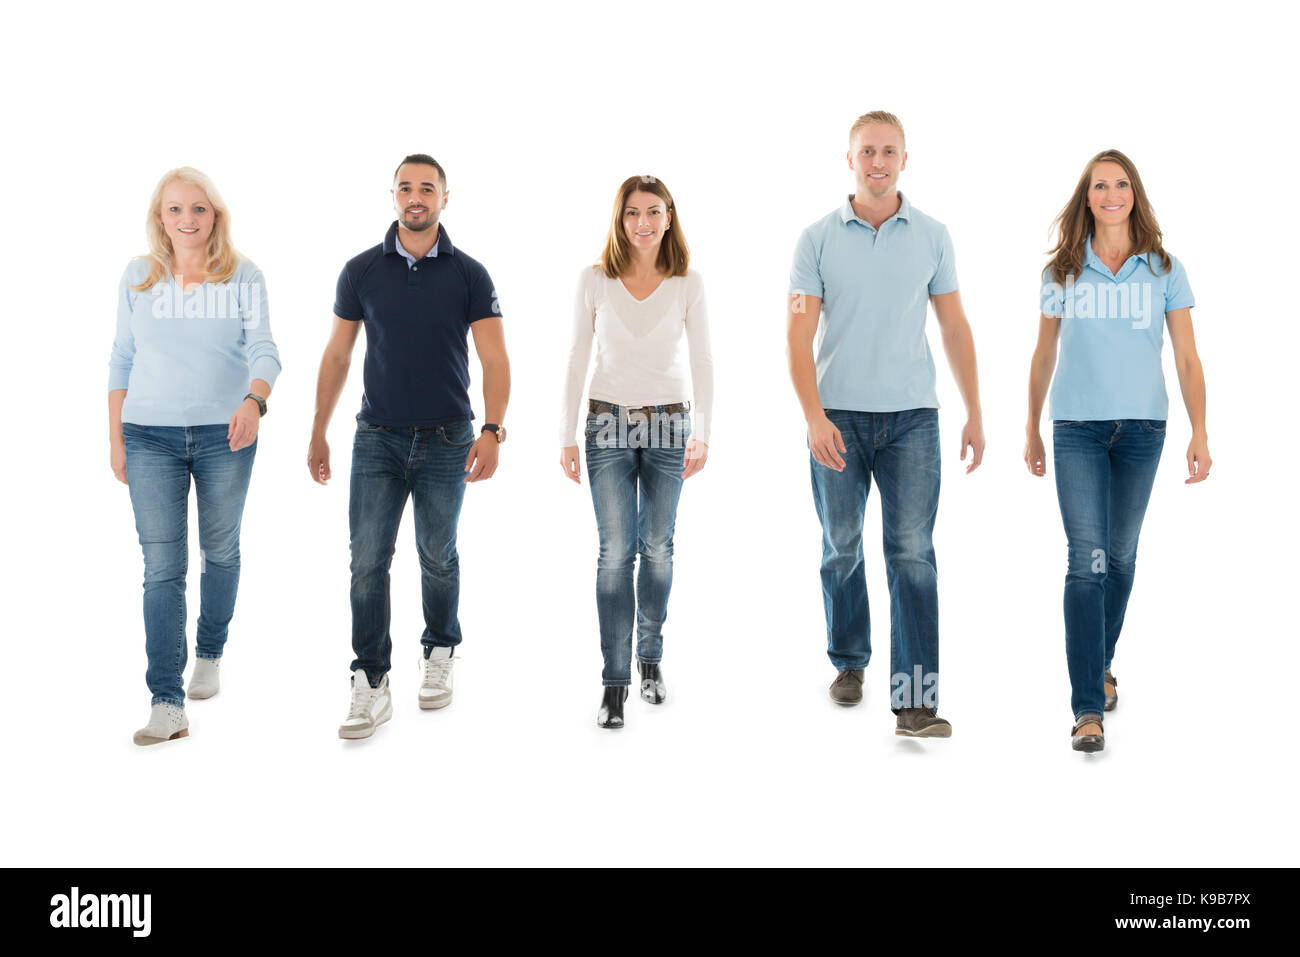 Full length portrait of confident people in casuals walking against white background Stock Photo